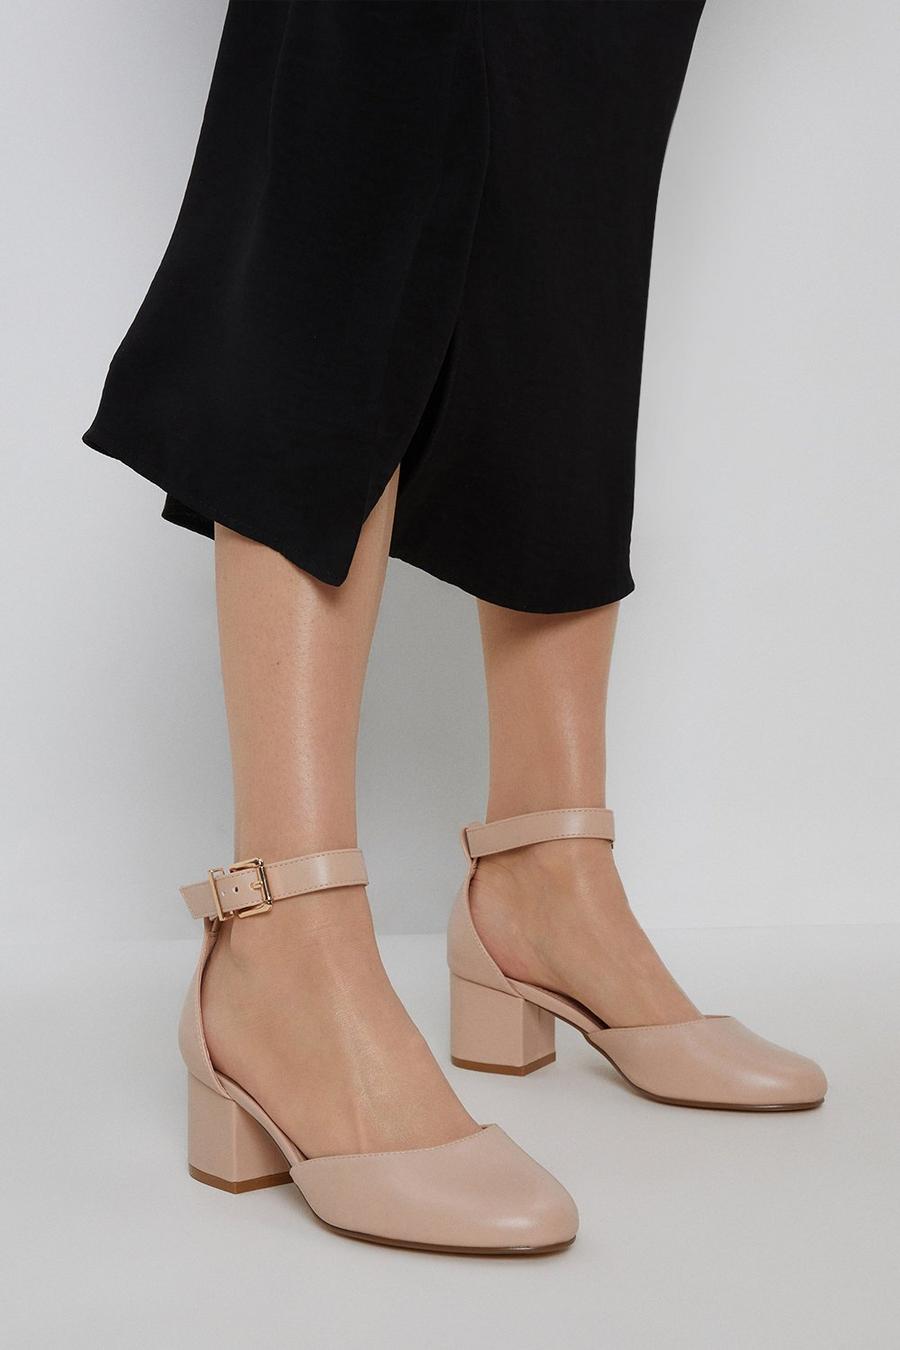 Wide Fit Hope Ankle Strap Closed Toe